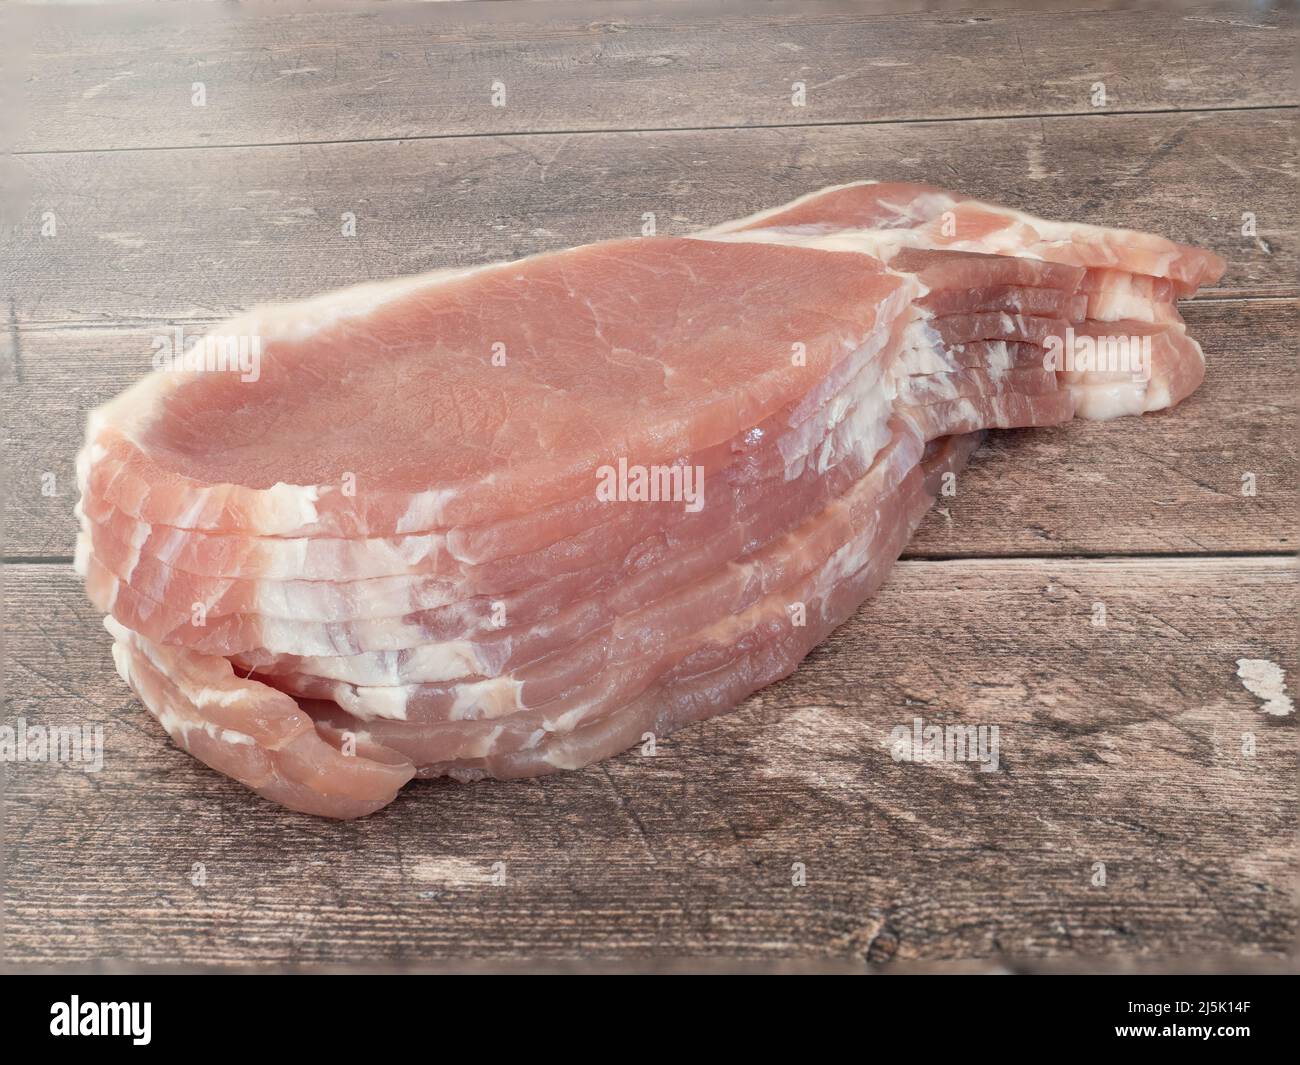 Slices of raw back bacon on a wooden table Stock Photo